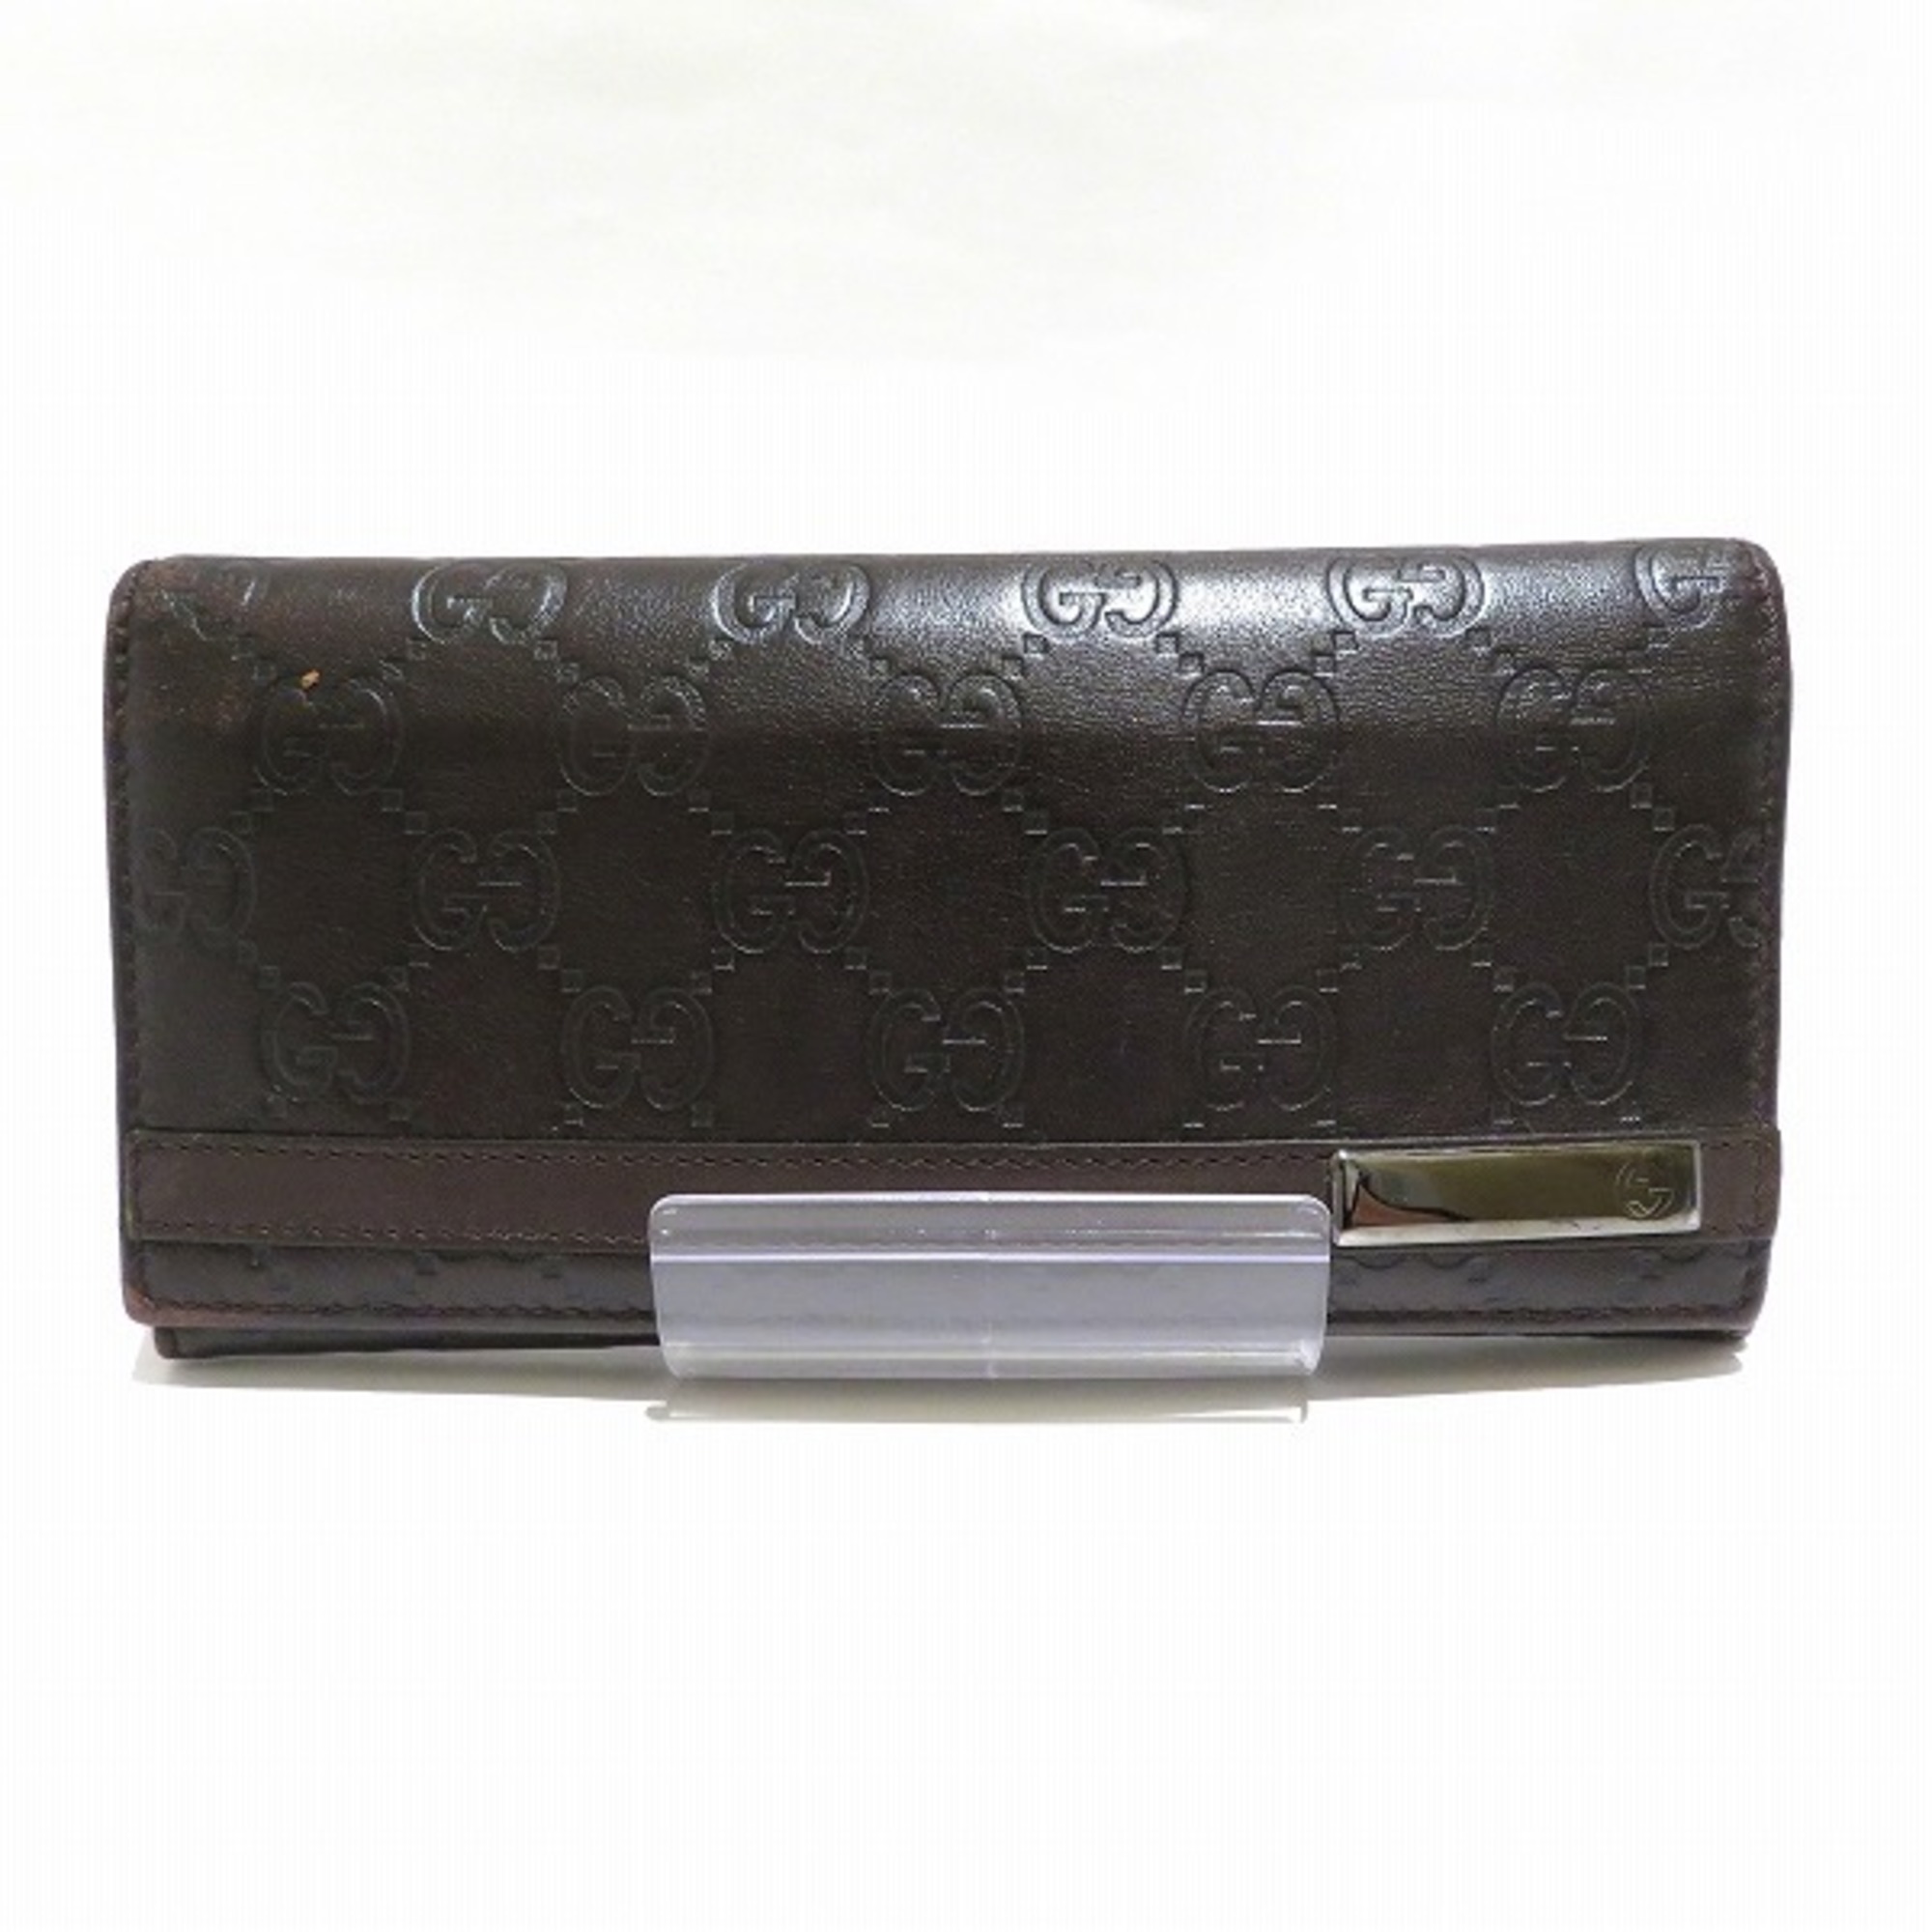 Gucci GUCCI Guccisima 233112 Leather Wallet Bifold Long Unisex